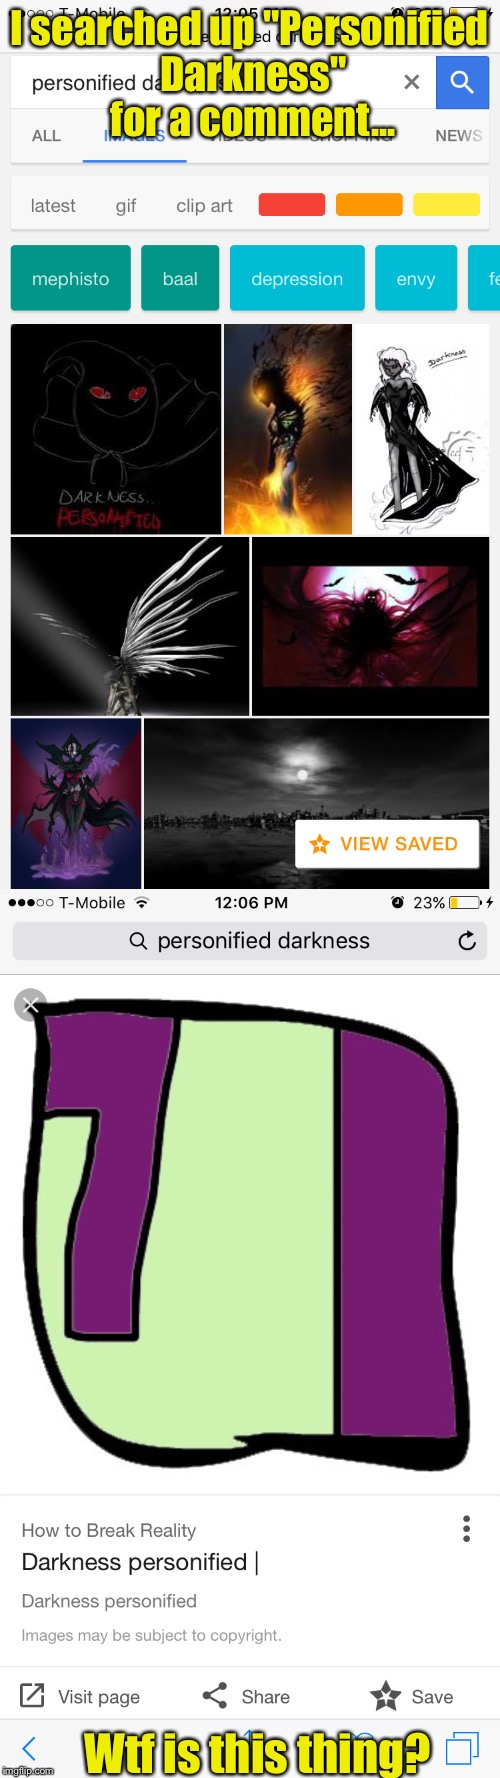 But why? | I searched up "Personified Darkness" for a comment... Wtf is this thing? | image tagged in google images,wtf,hello darkness my old friend,meme comments | made w/ Imgflip meme maker